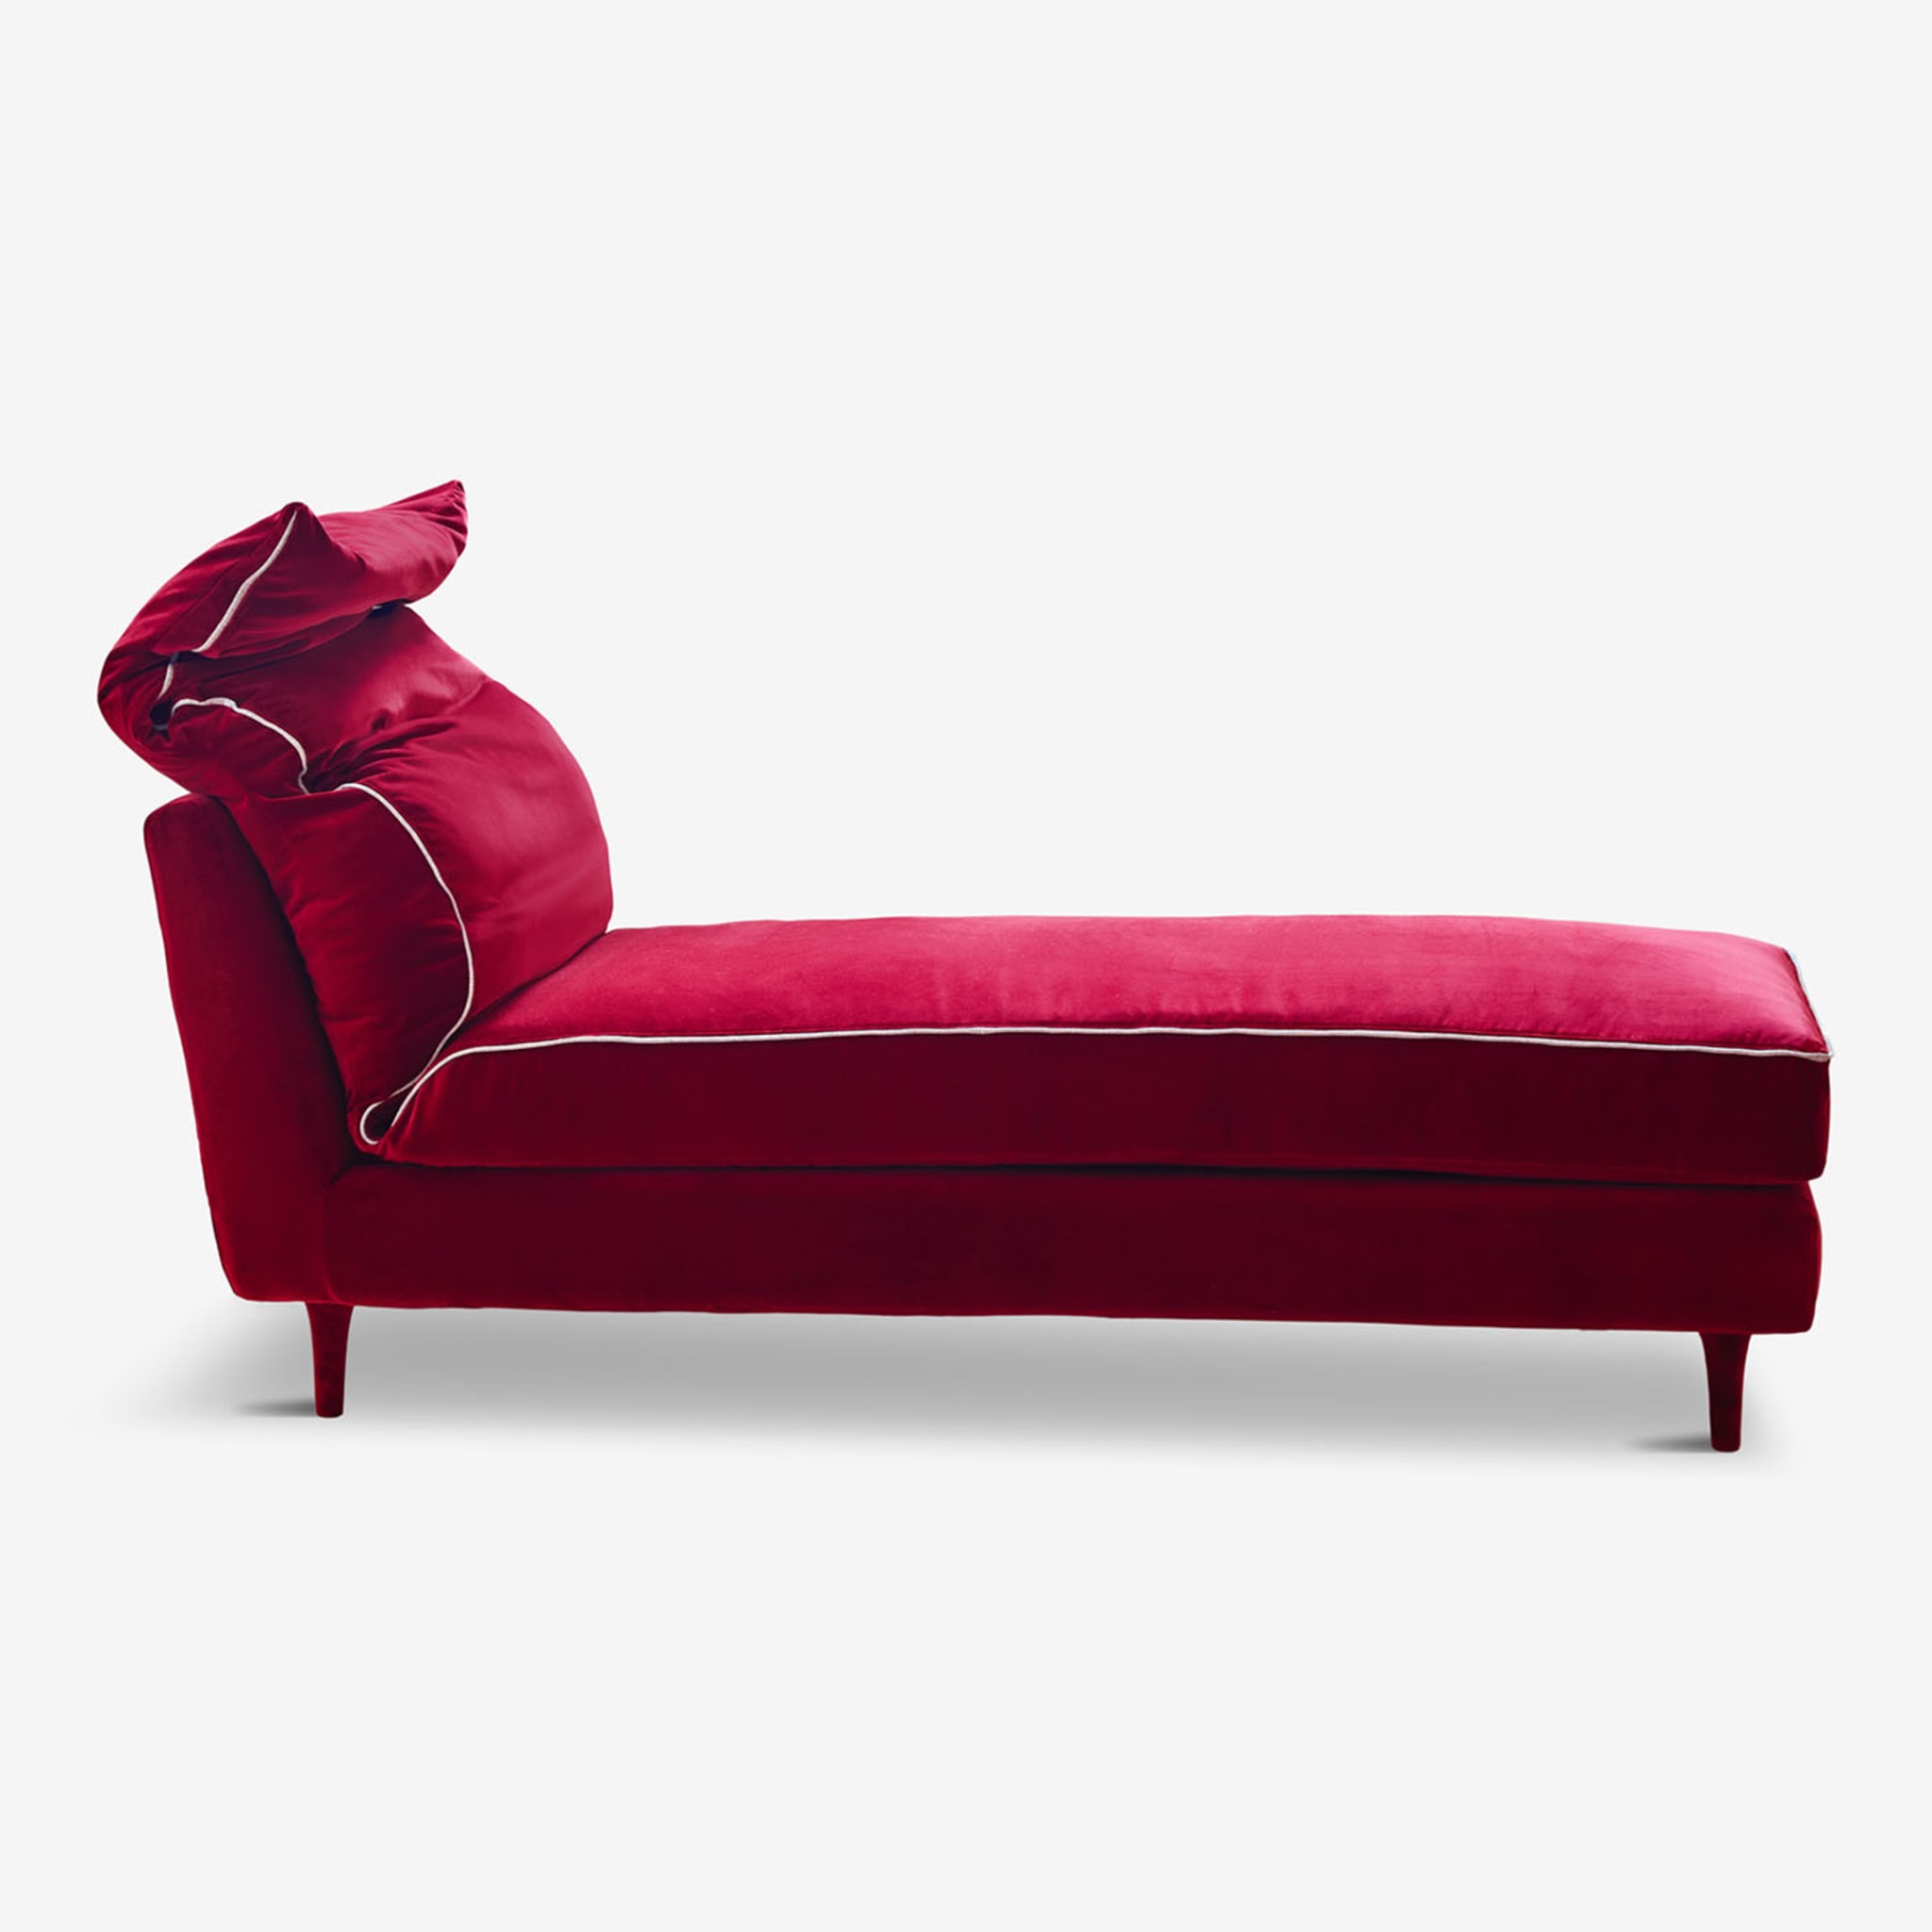 Casquet Red Passion Velvet Daybed - Alternative view 3